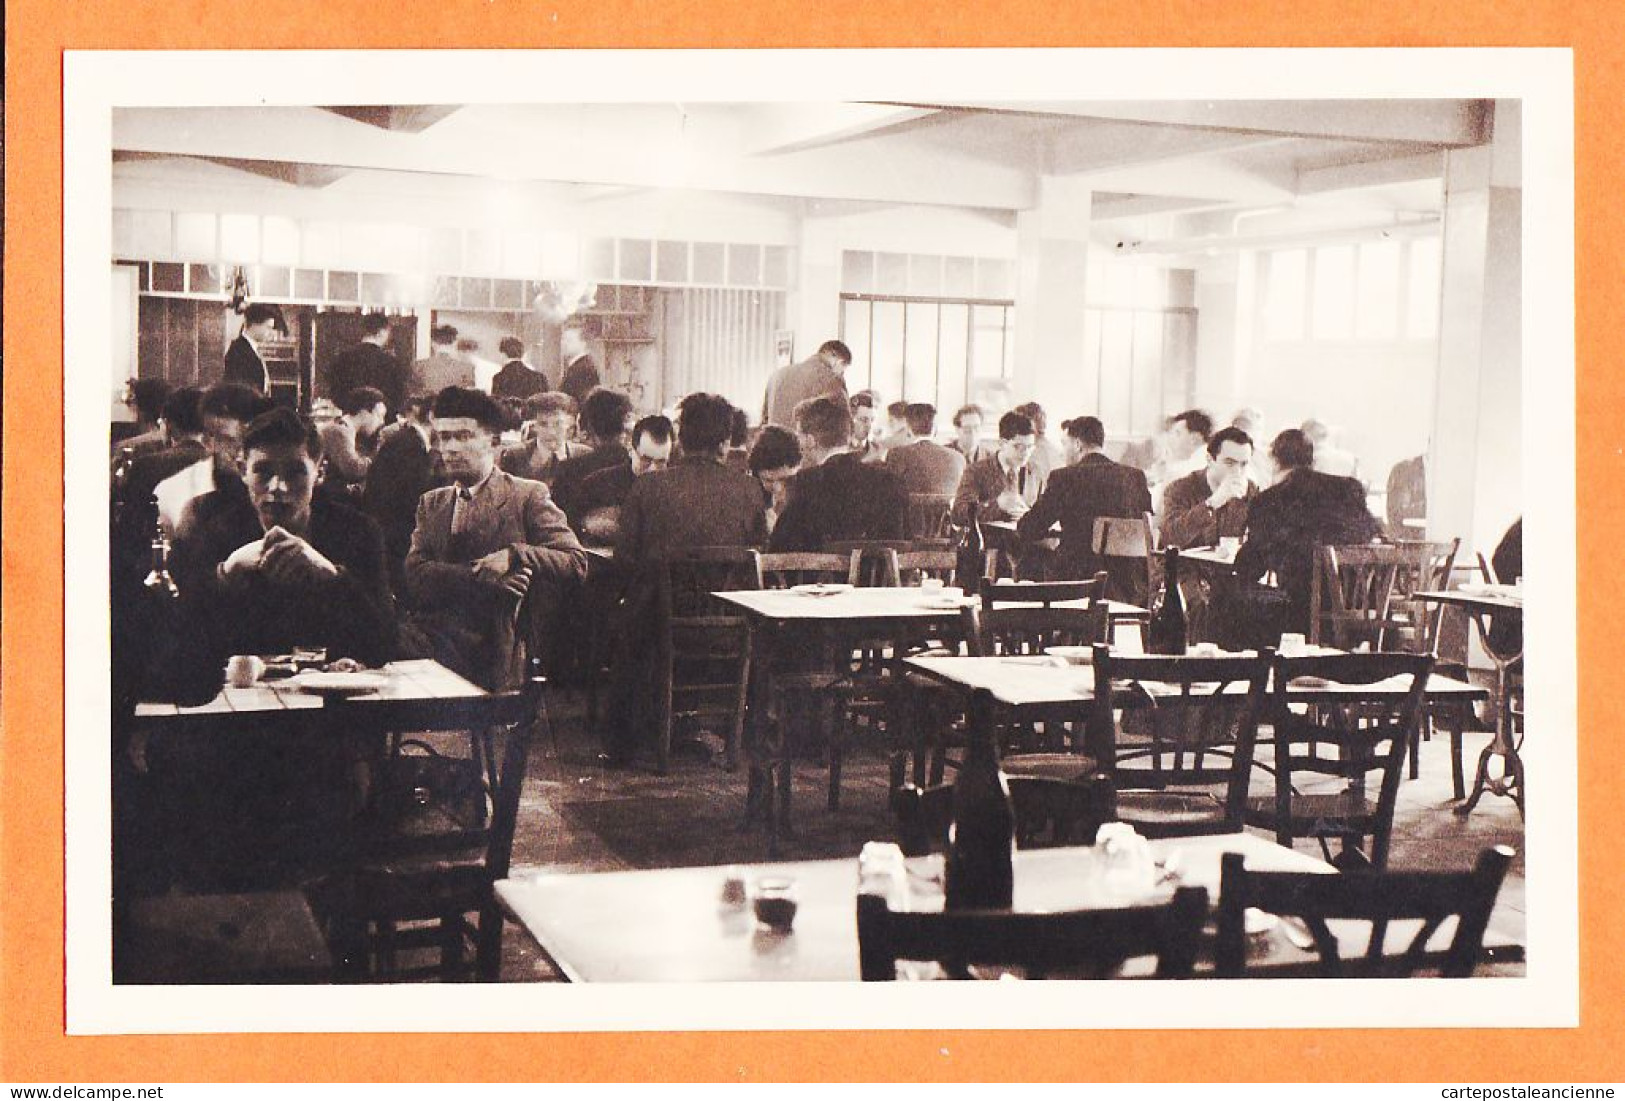 06034 / ♥️ ⭐ ◉ 92-MALAKOFF Foyer Cafetraria Etudiants Ecole Supérieure ELECTRICITE Banlieue OUEST 1940s PHOTO 13,5x8,5 - Malakoff